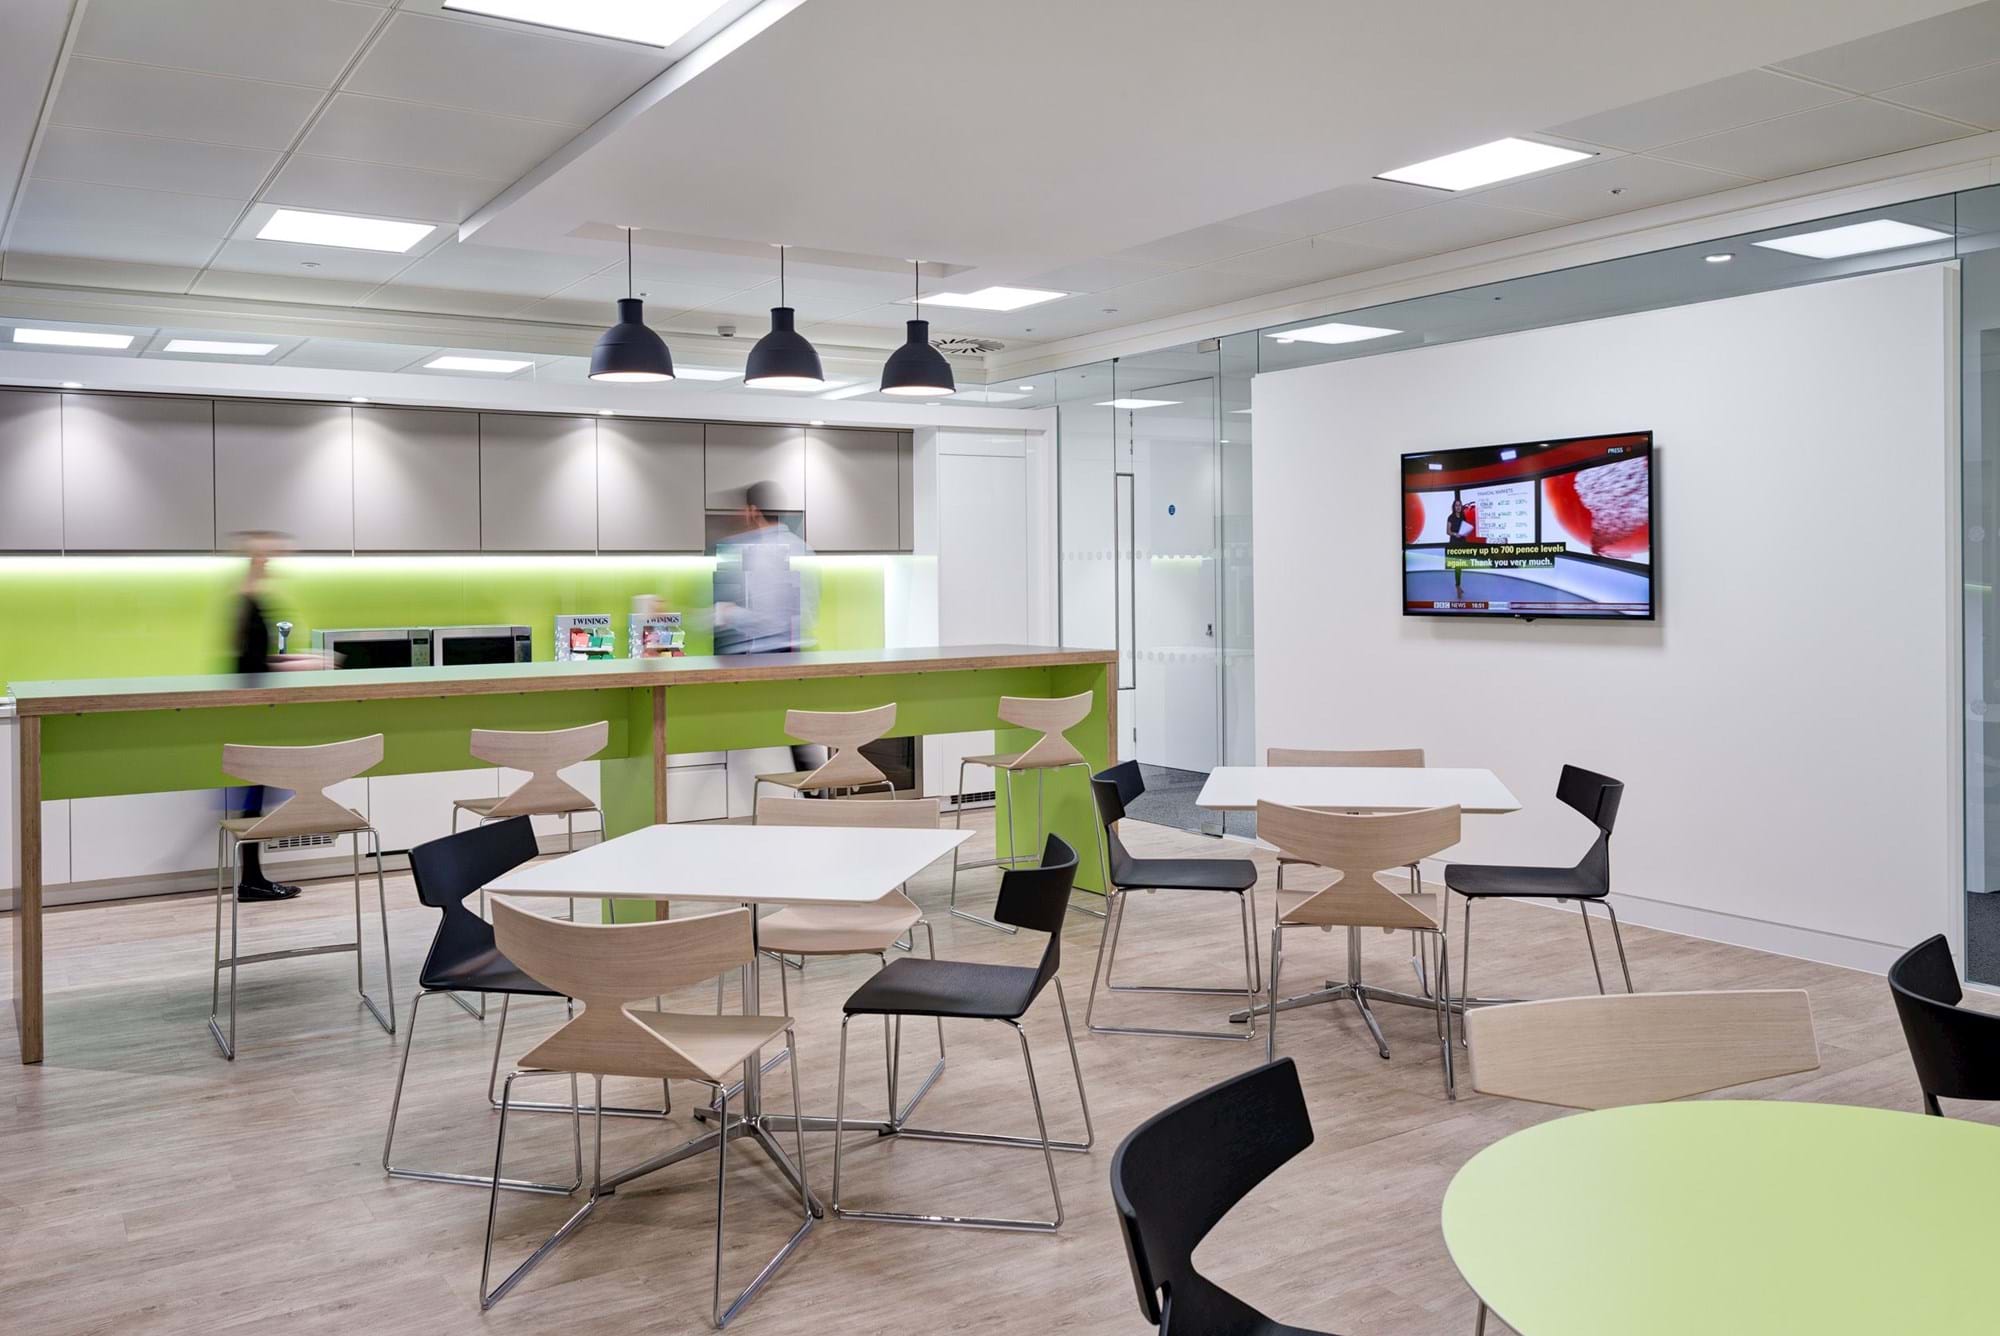 Modus Workspace office design, fit out and refurbishment - Sirius - Teapoint - Sirius 07 highres sRGB.jpg